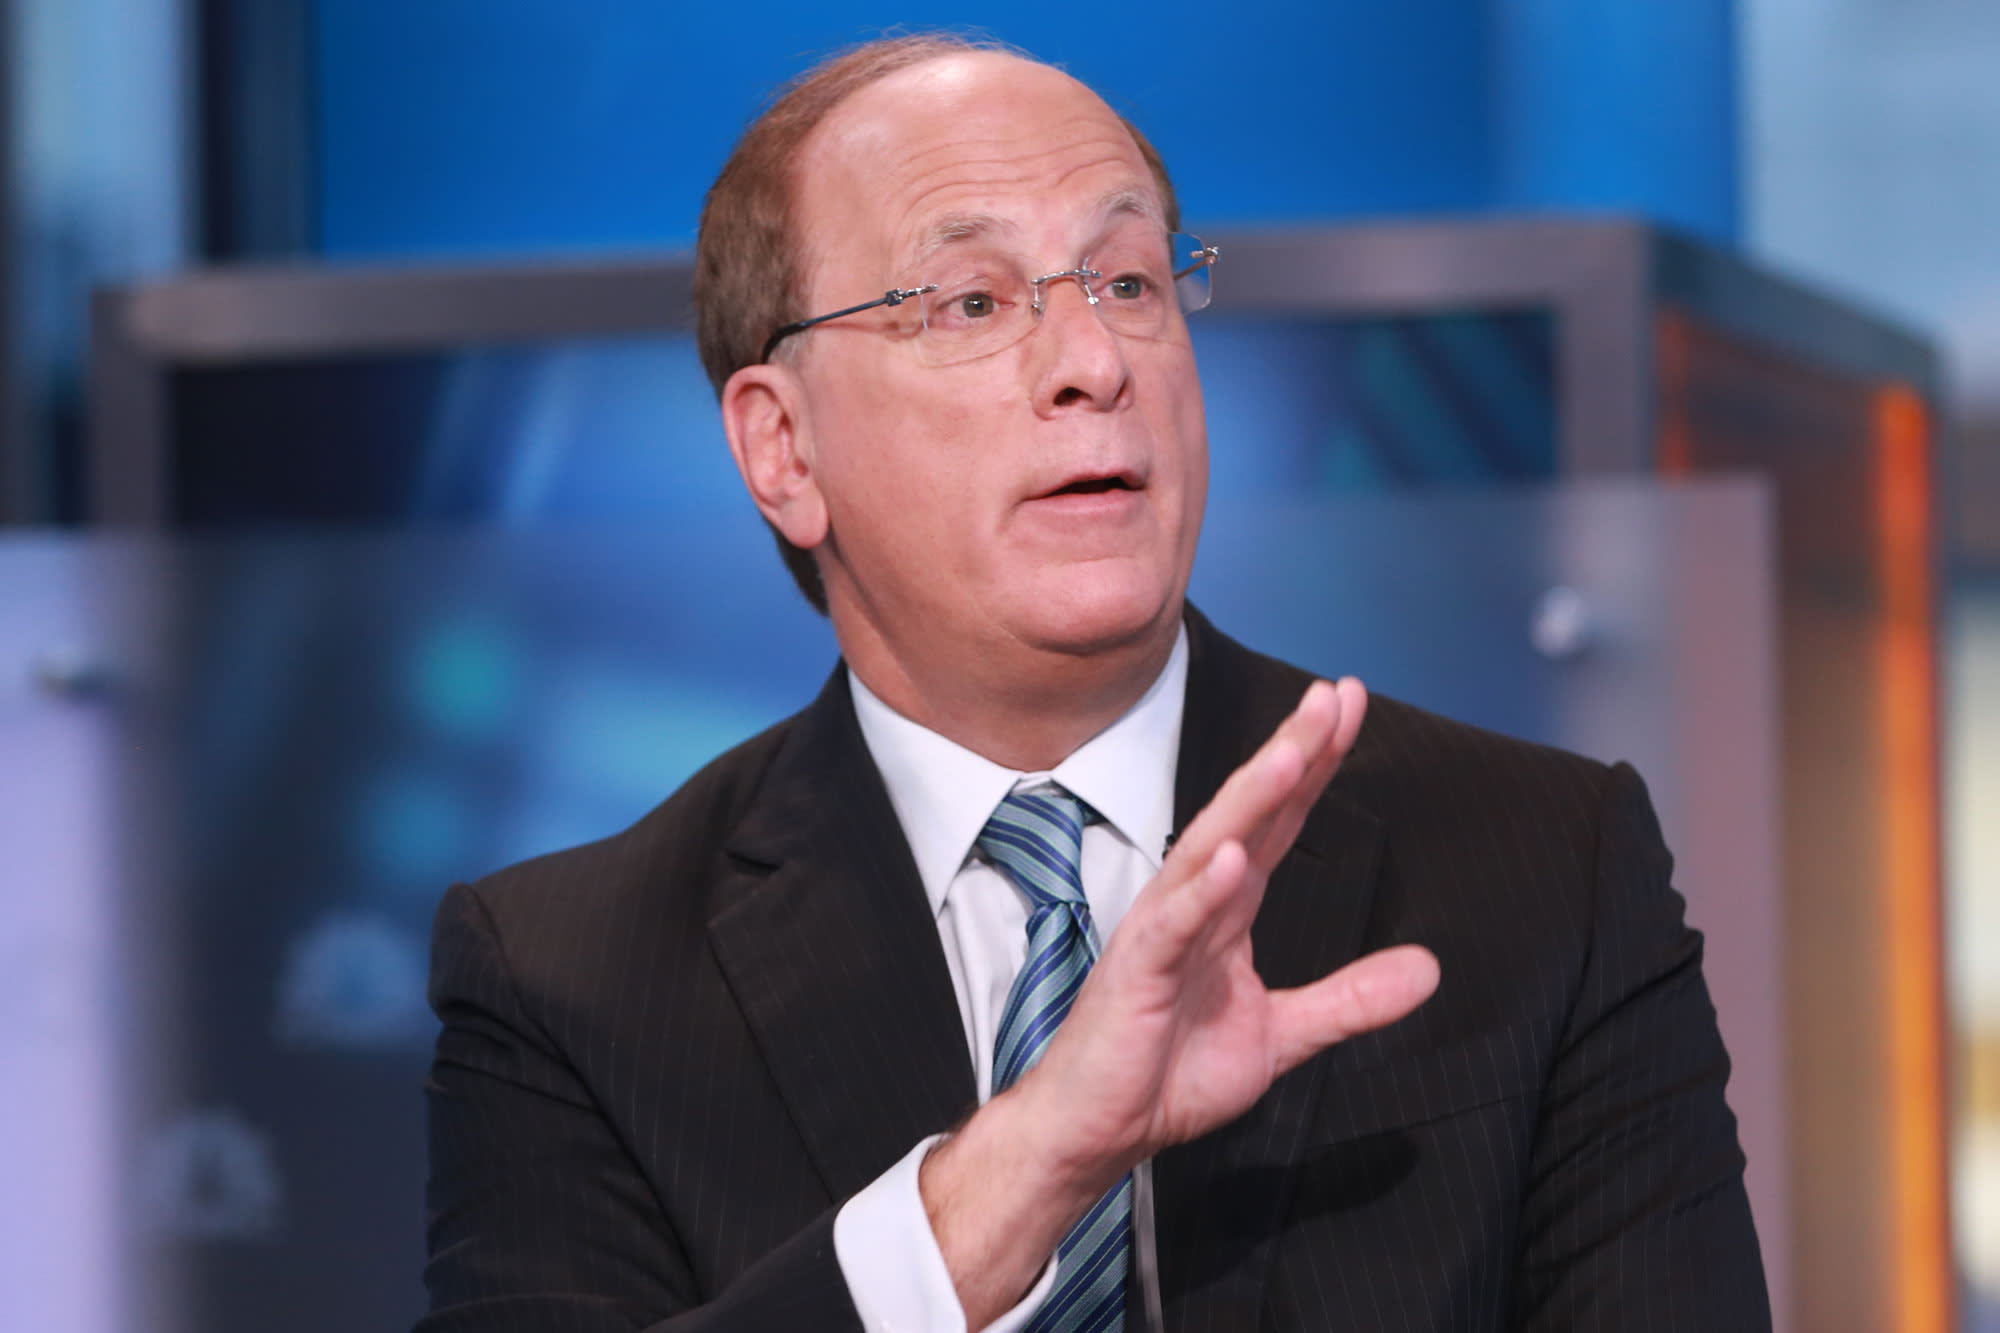 BlackRock CEO Larry Fink says he is “incredibly upbeat” on the stock market